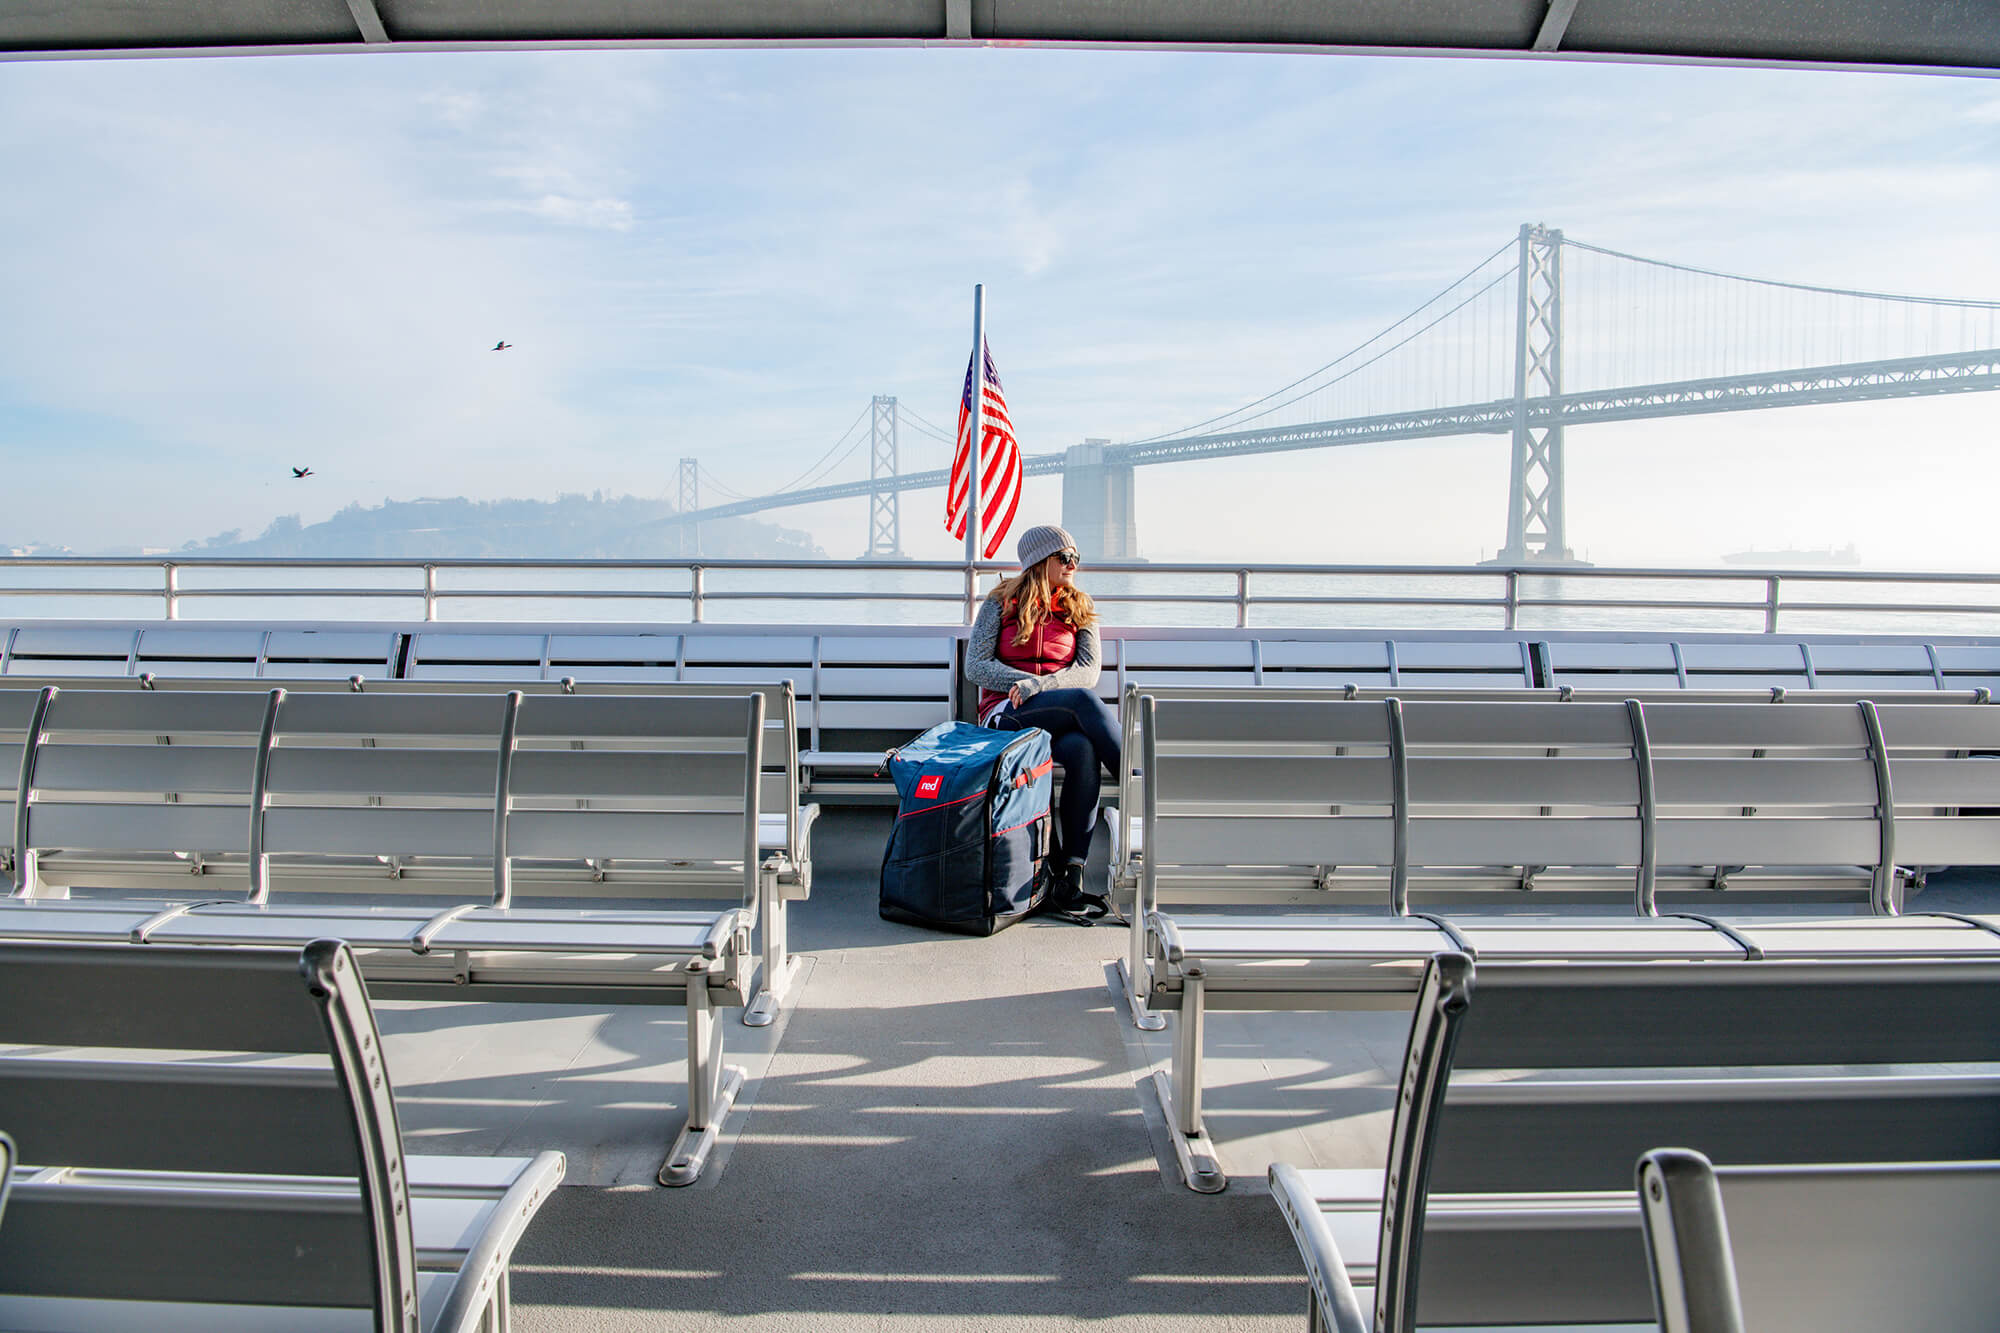 Woman On A Ferry With The San Francisco-Oakland Bay Bridge In The Background